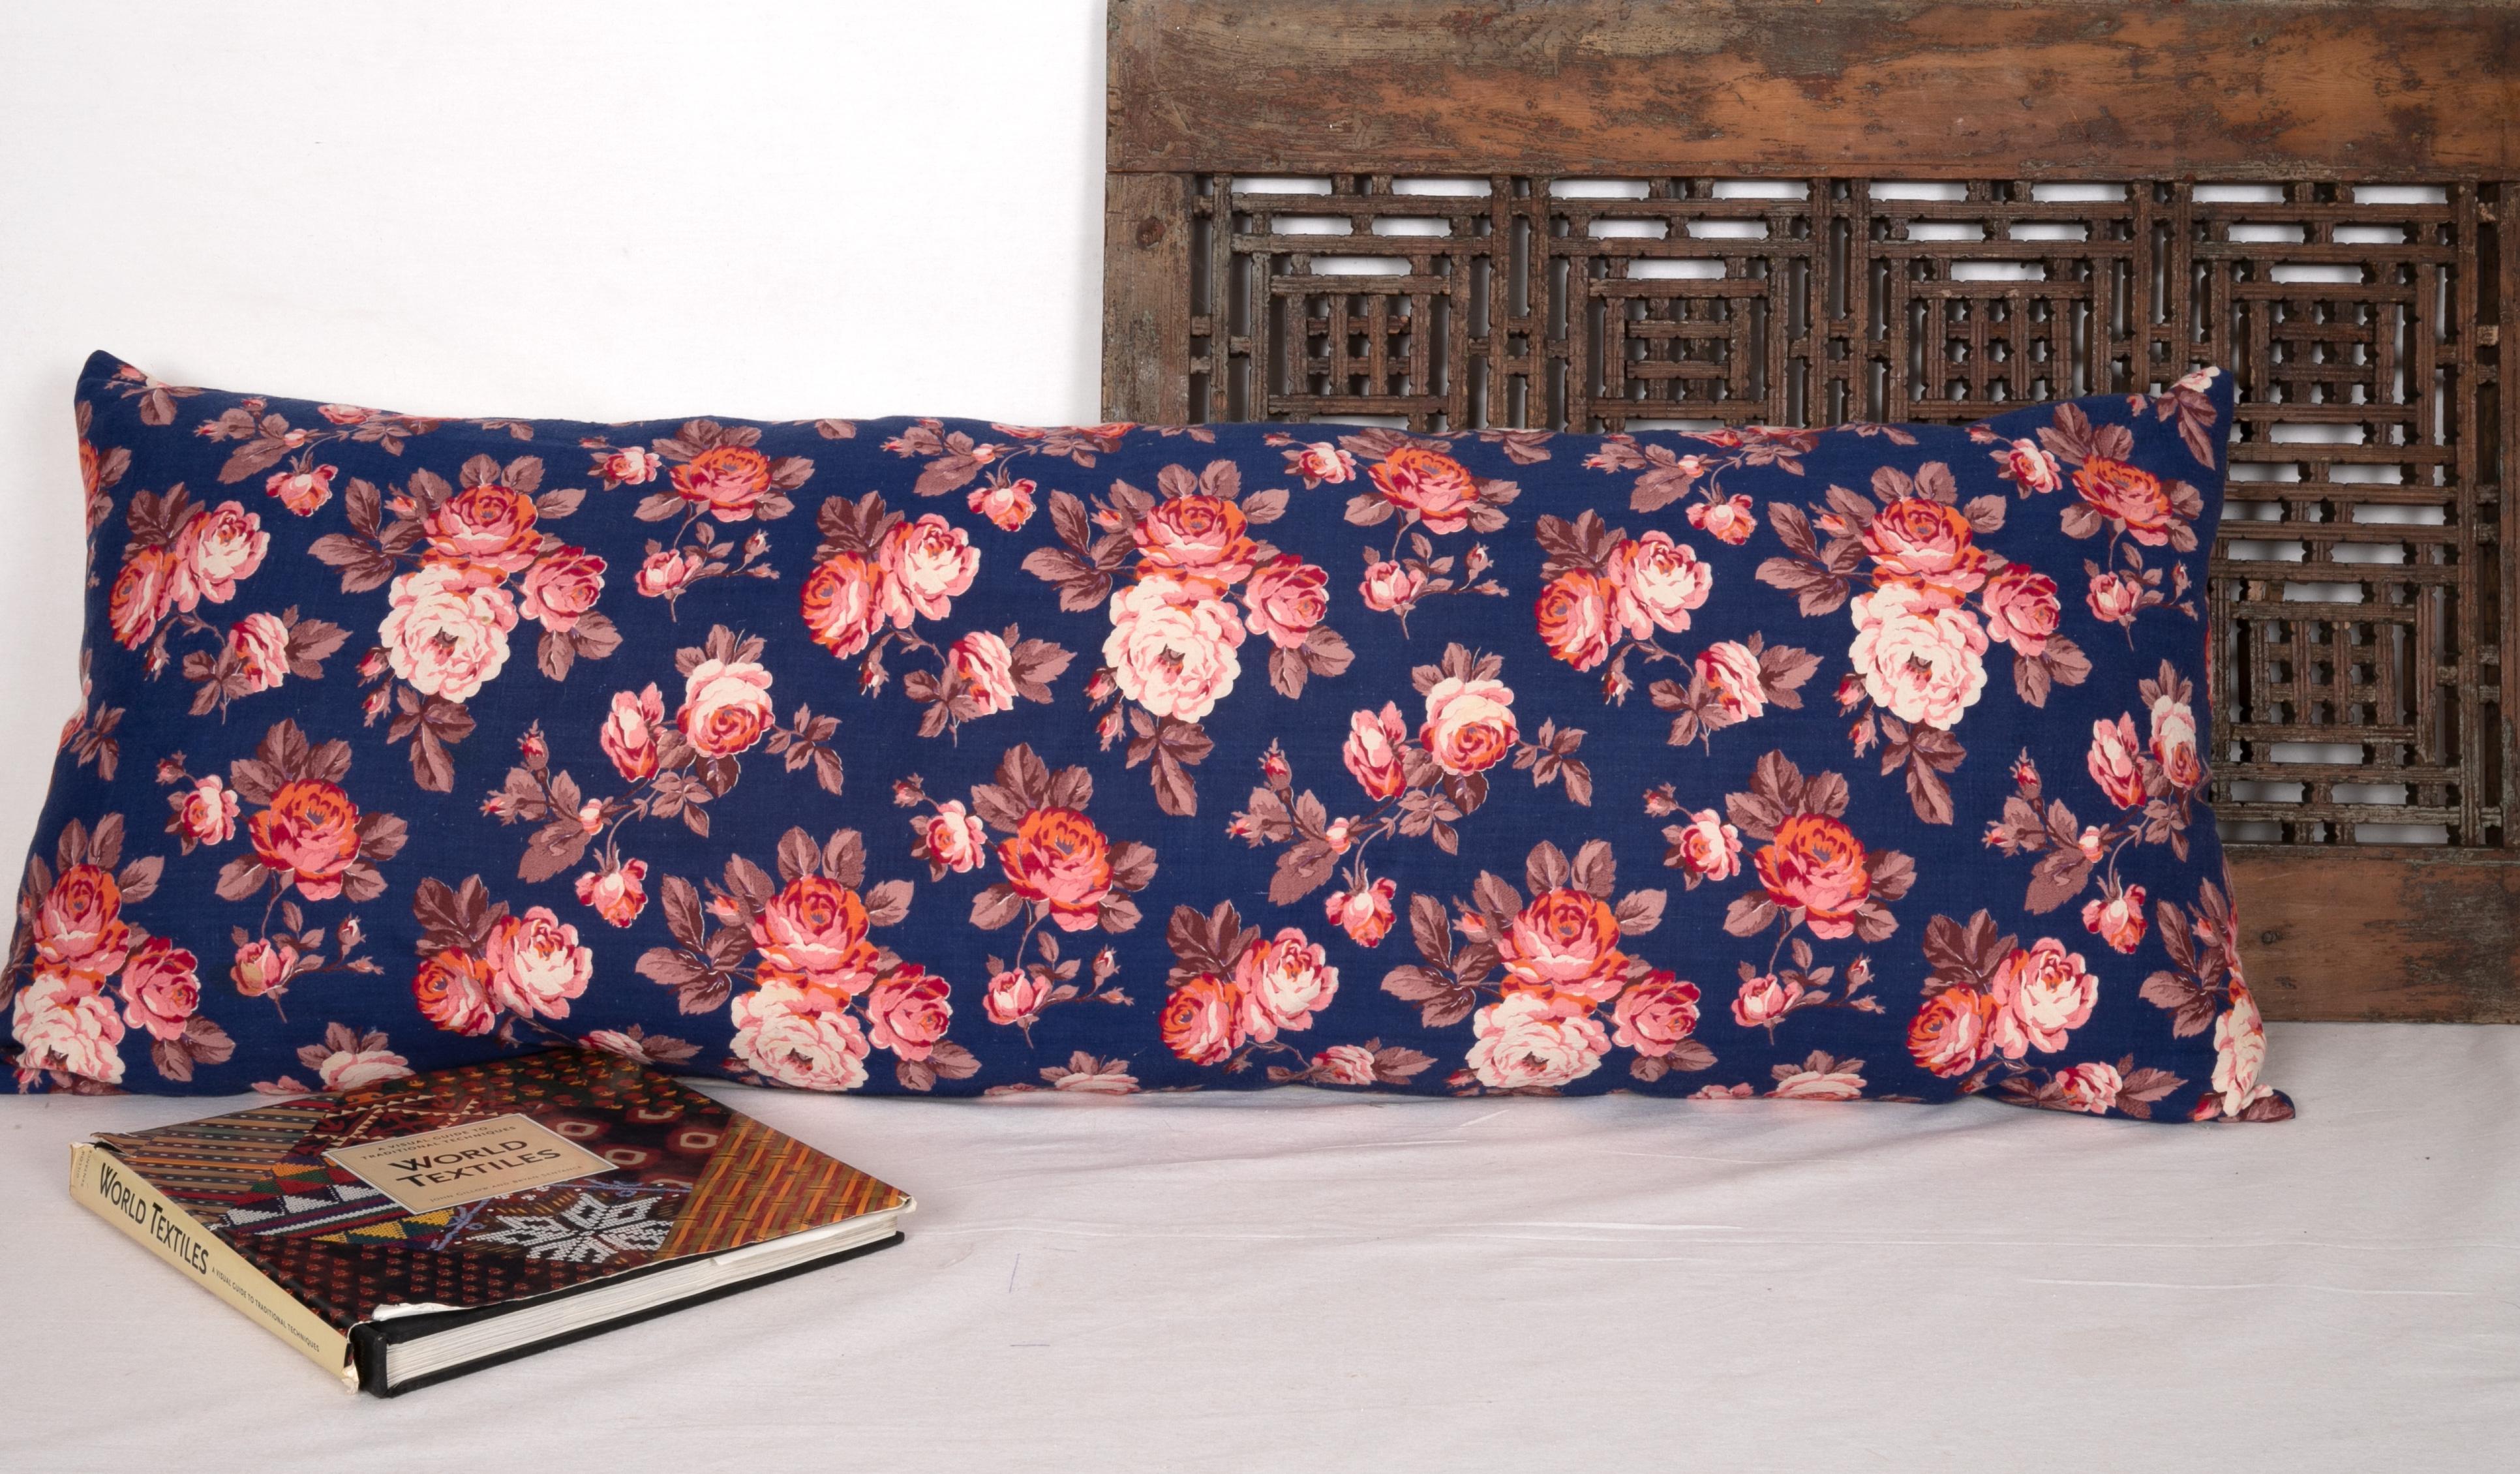 Woven Pillow Case Made from Mid-20th Century Russian Cotton Printed Textile, 1960s